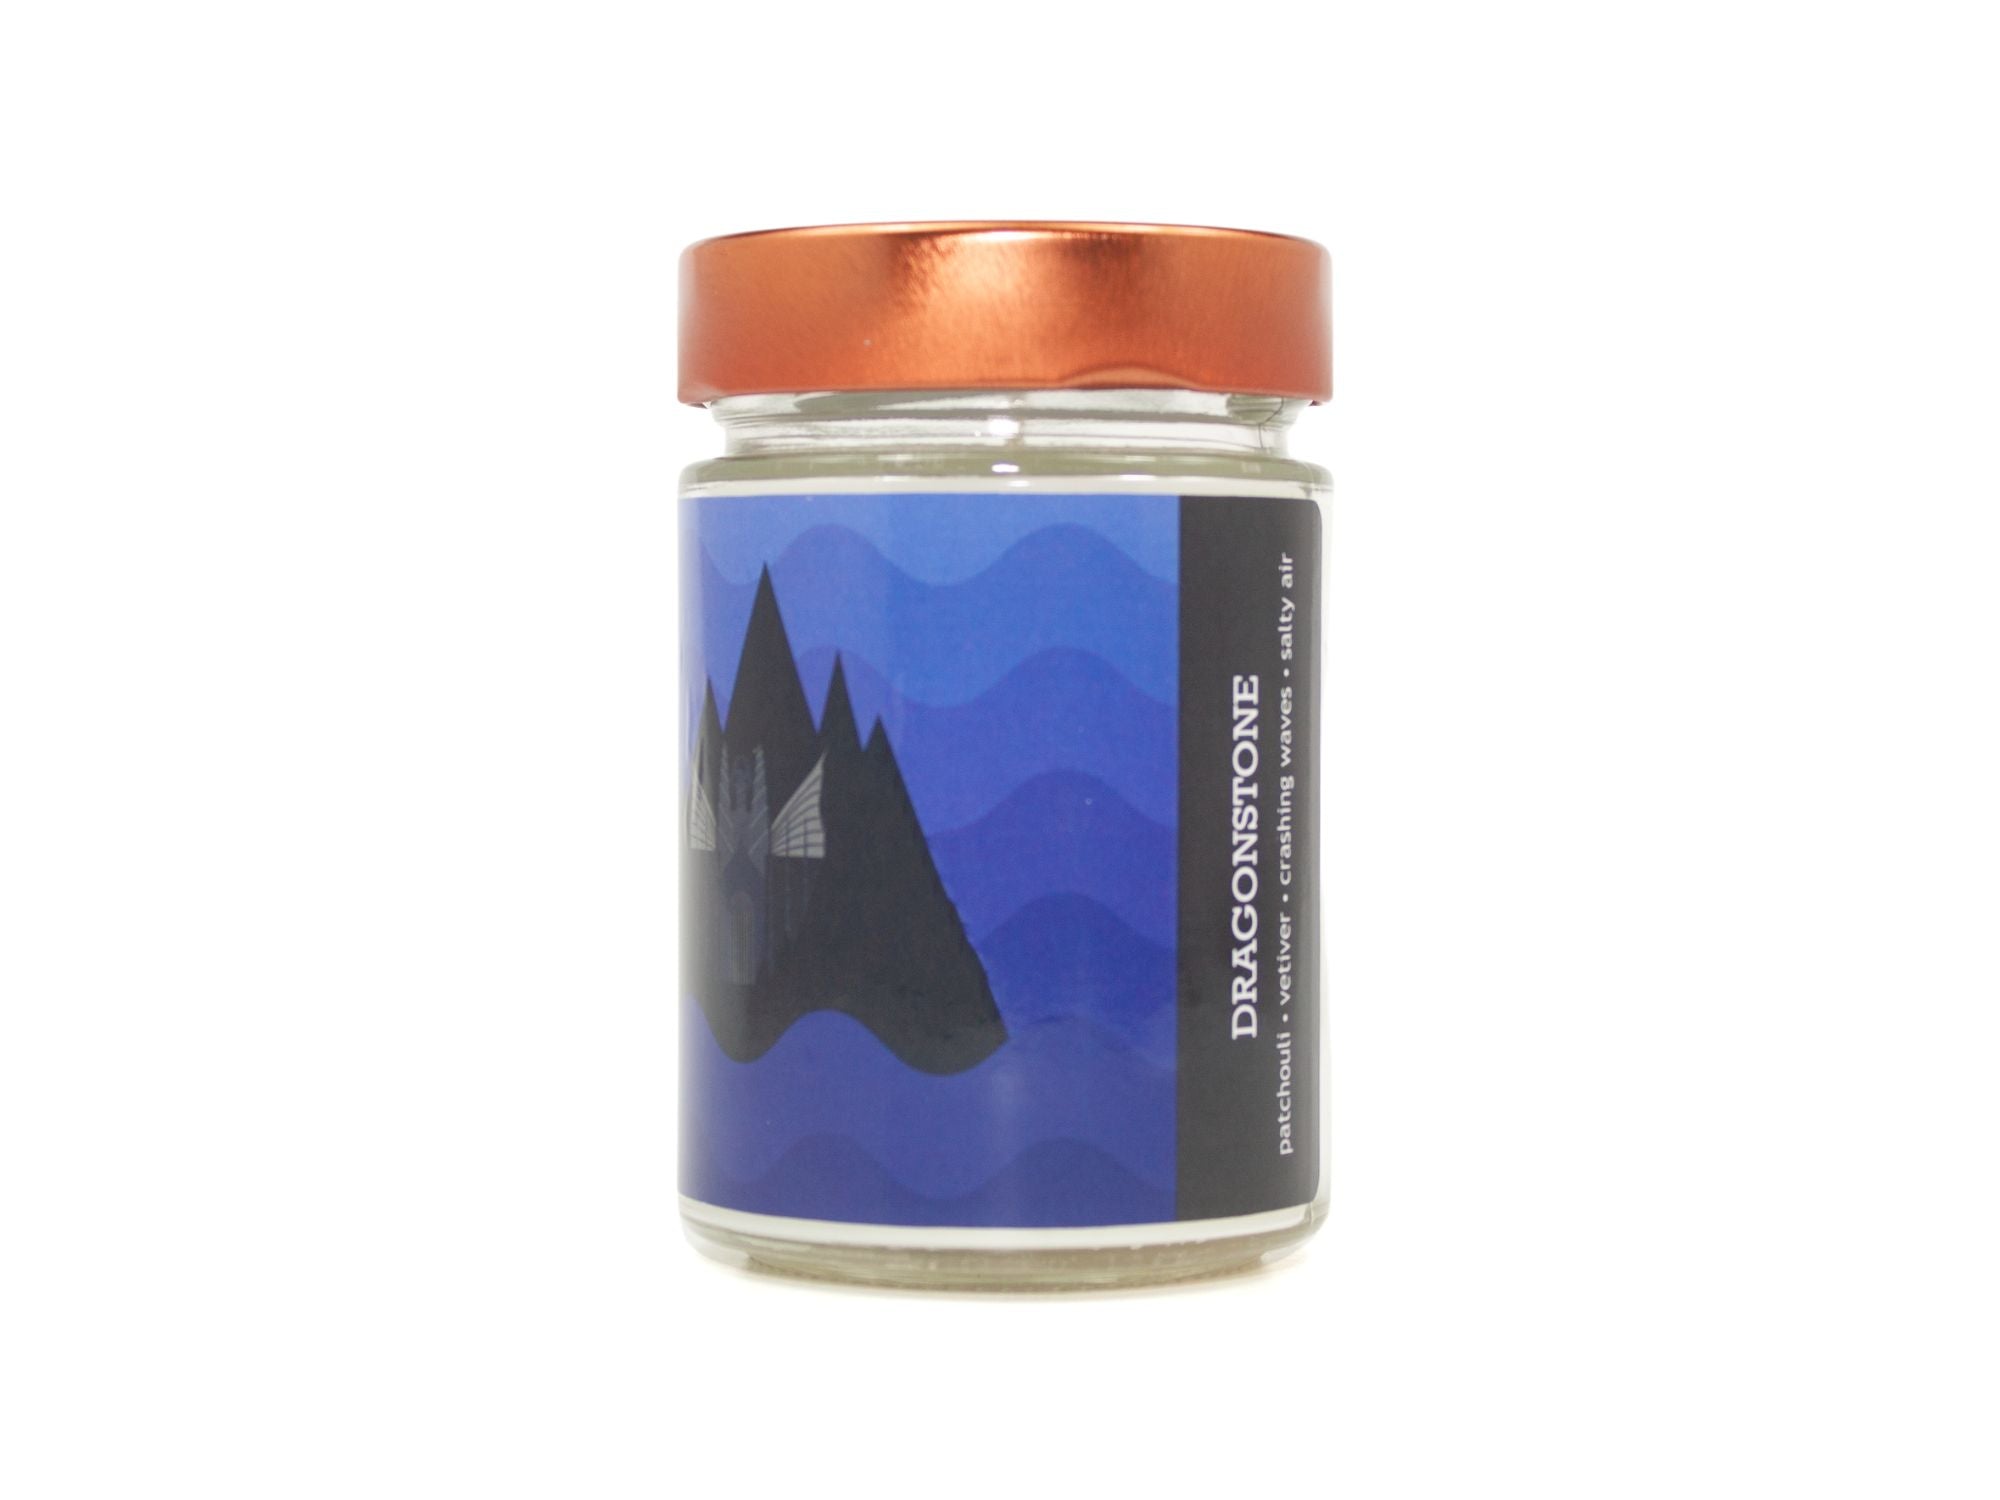 Onset & Rime chilly island scented candle called 